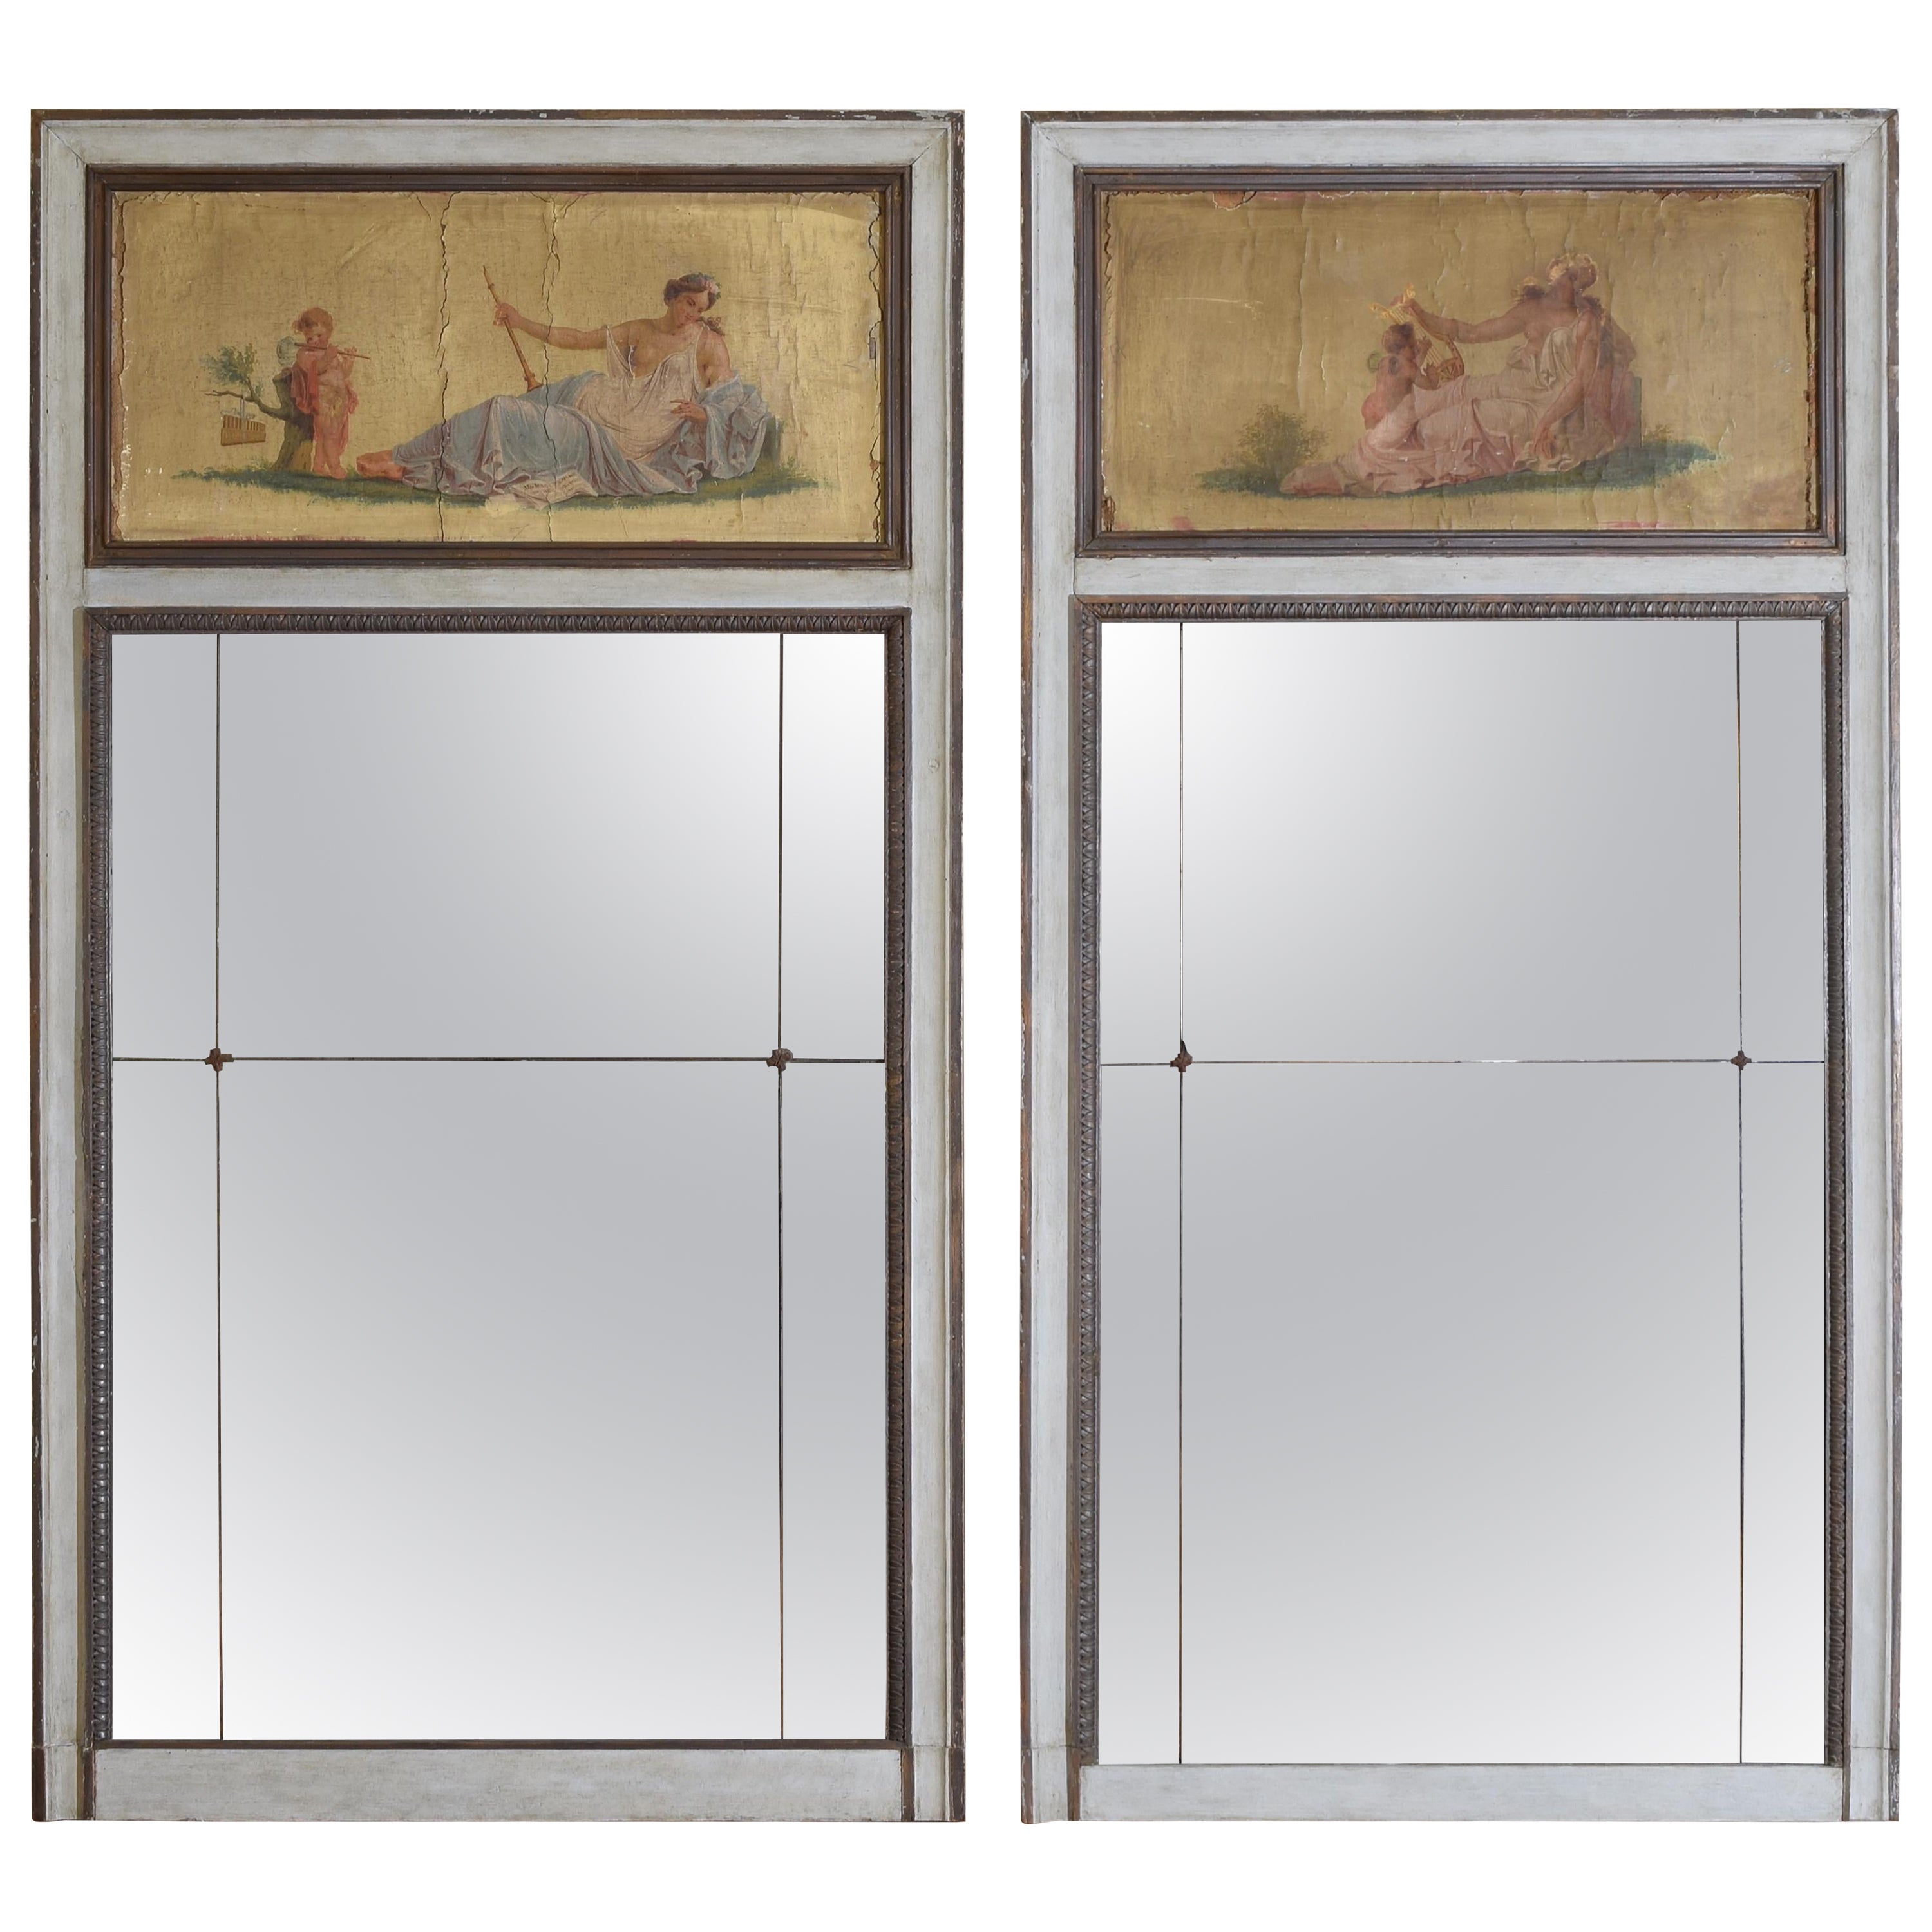 Pair French Neoclassic Painted Trumeau Mirrors, mid 19th century For Sale